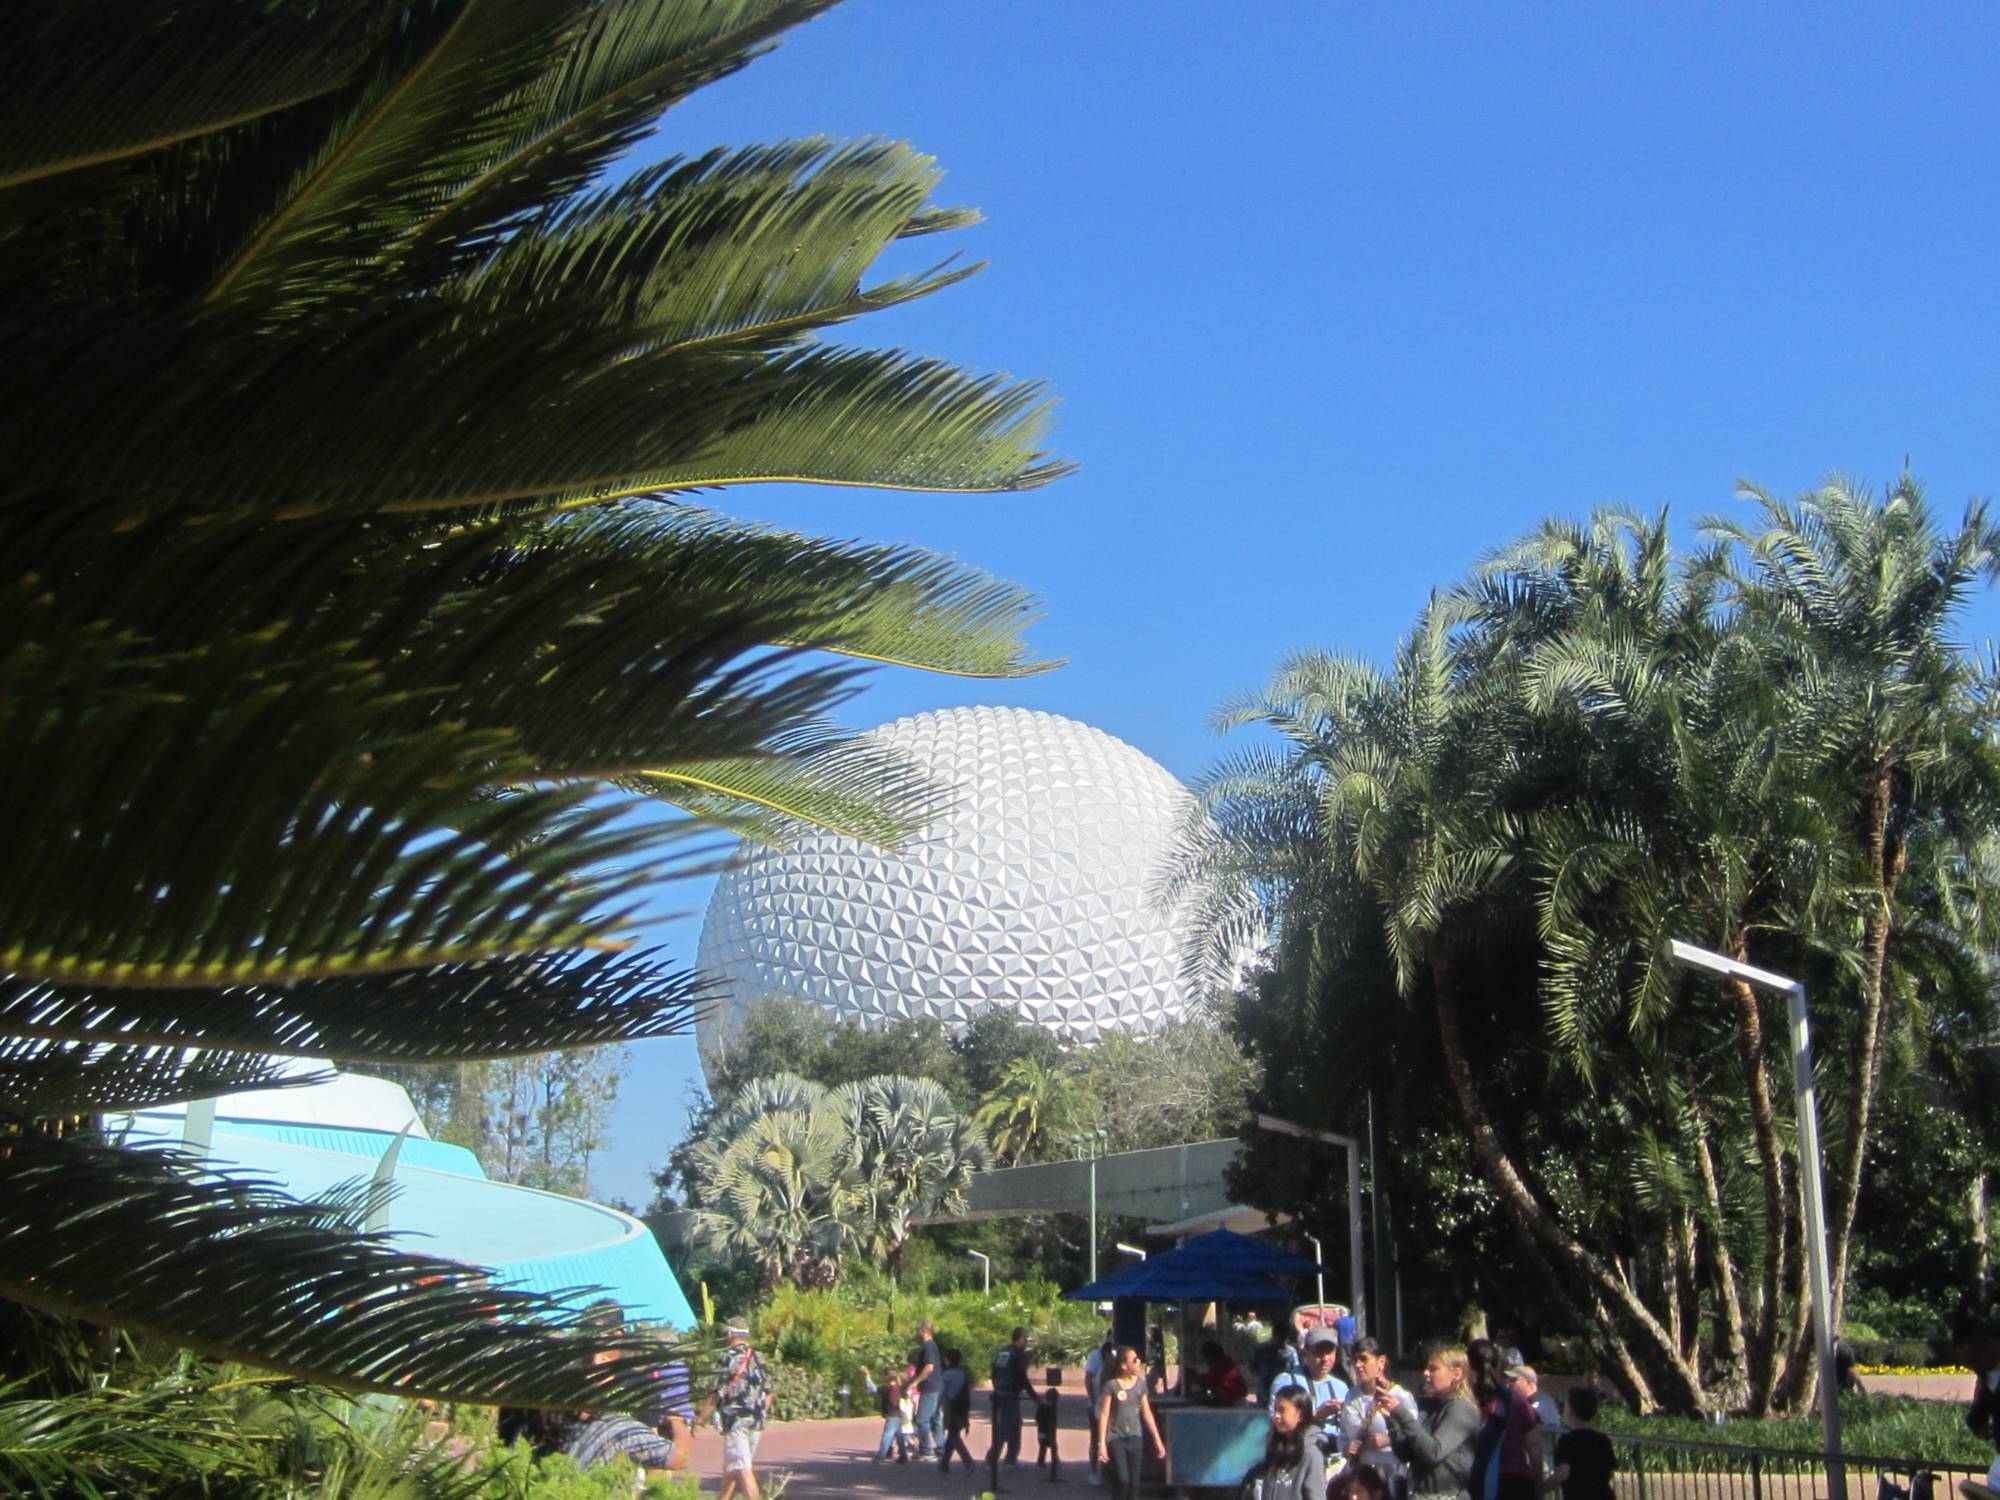 A day at Epcot